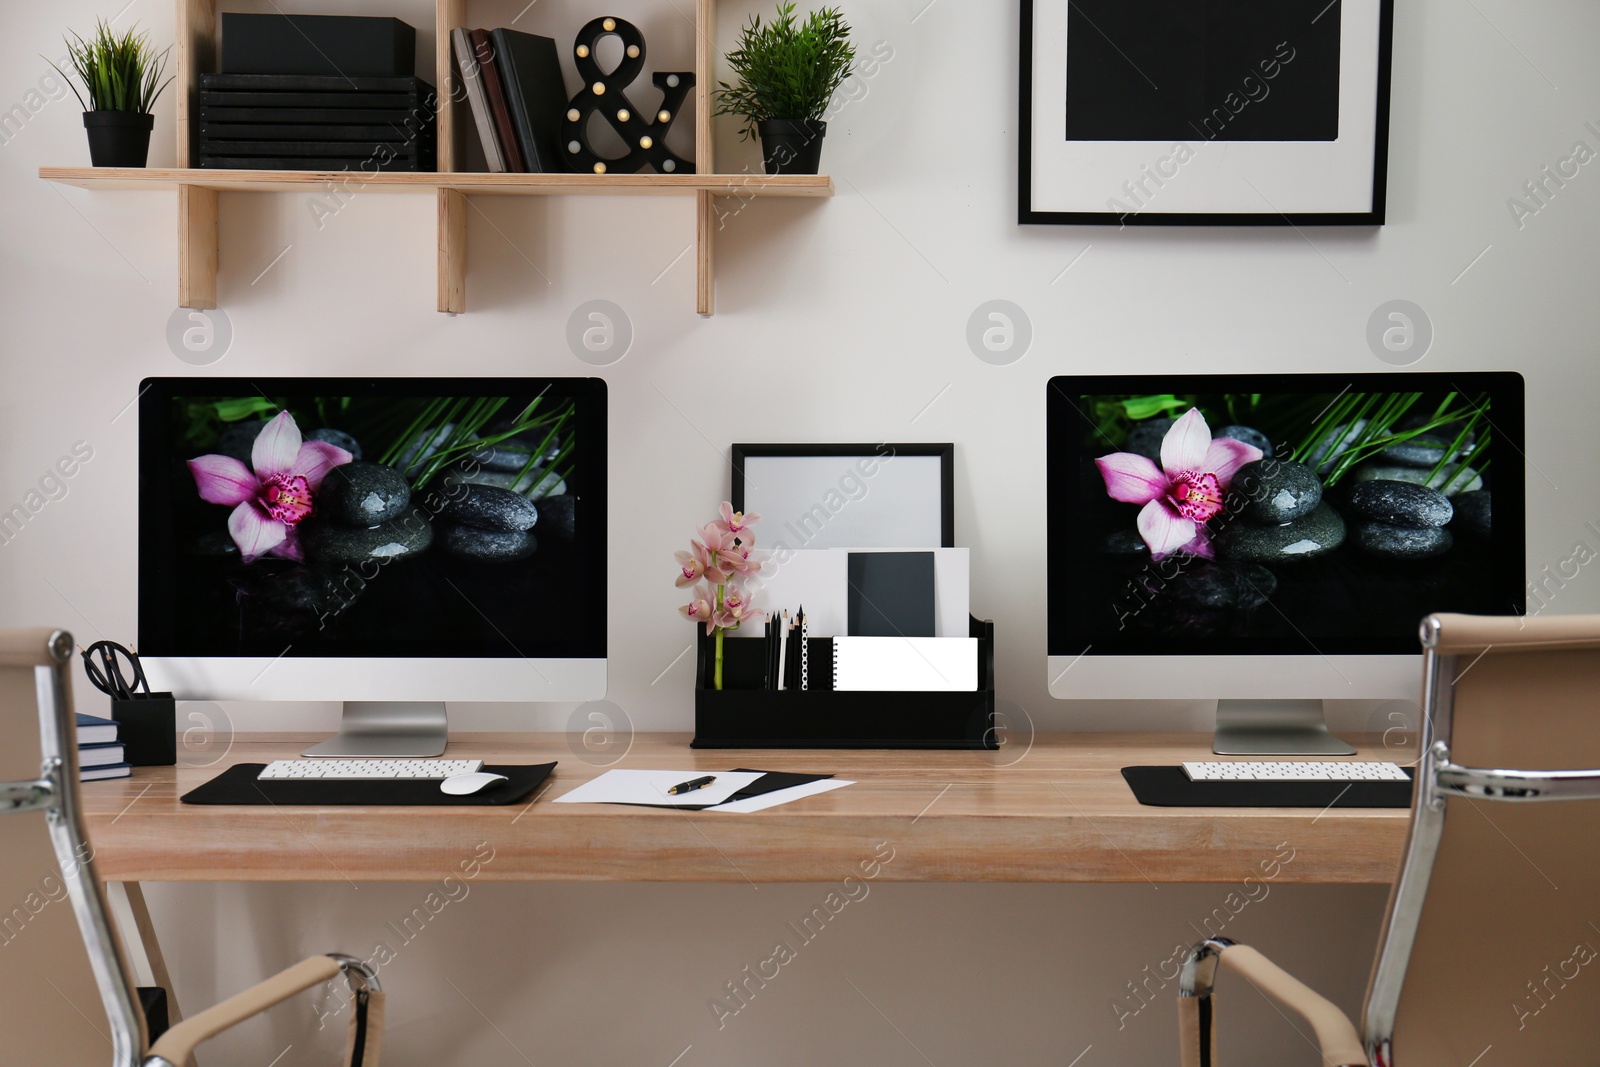 Photo of Modern workplace with large desk and computers in room. Stylish interior